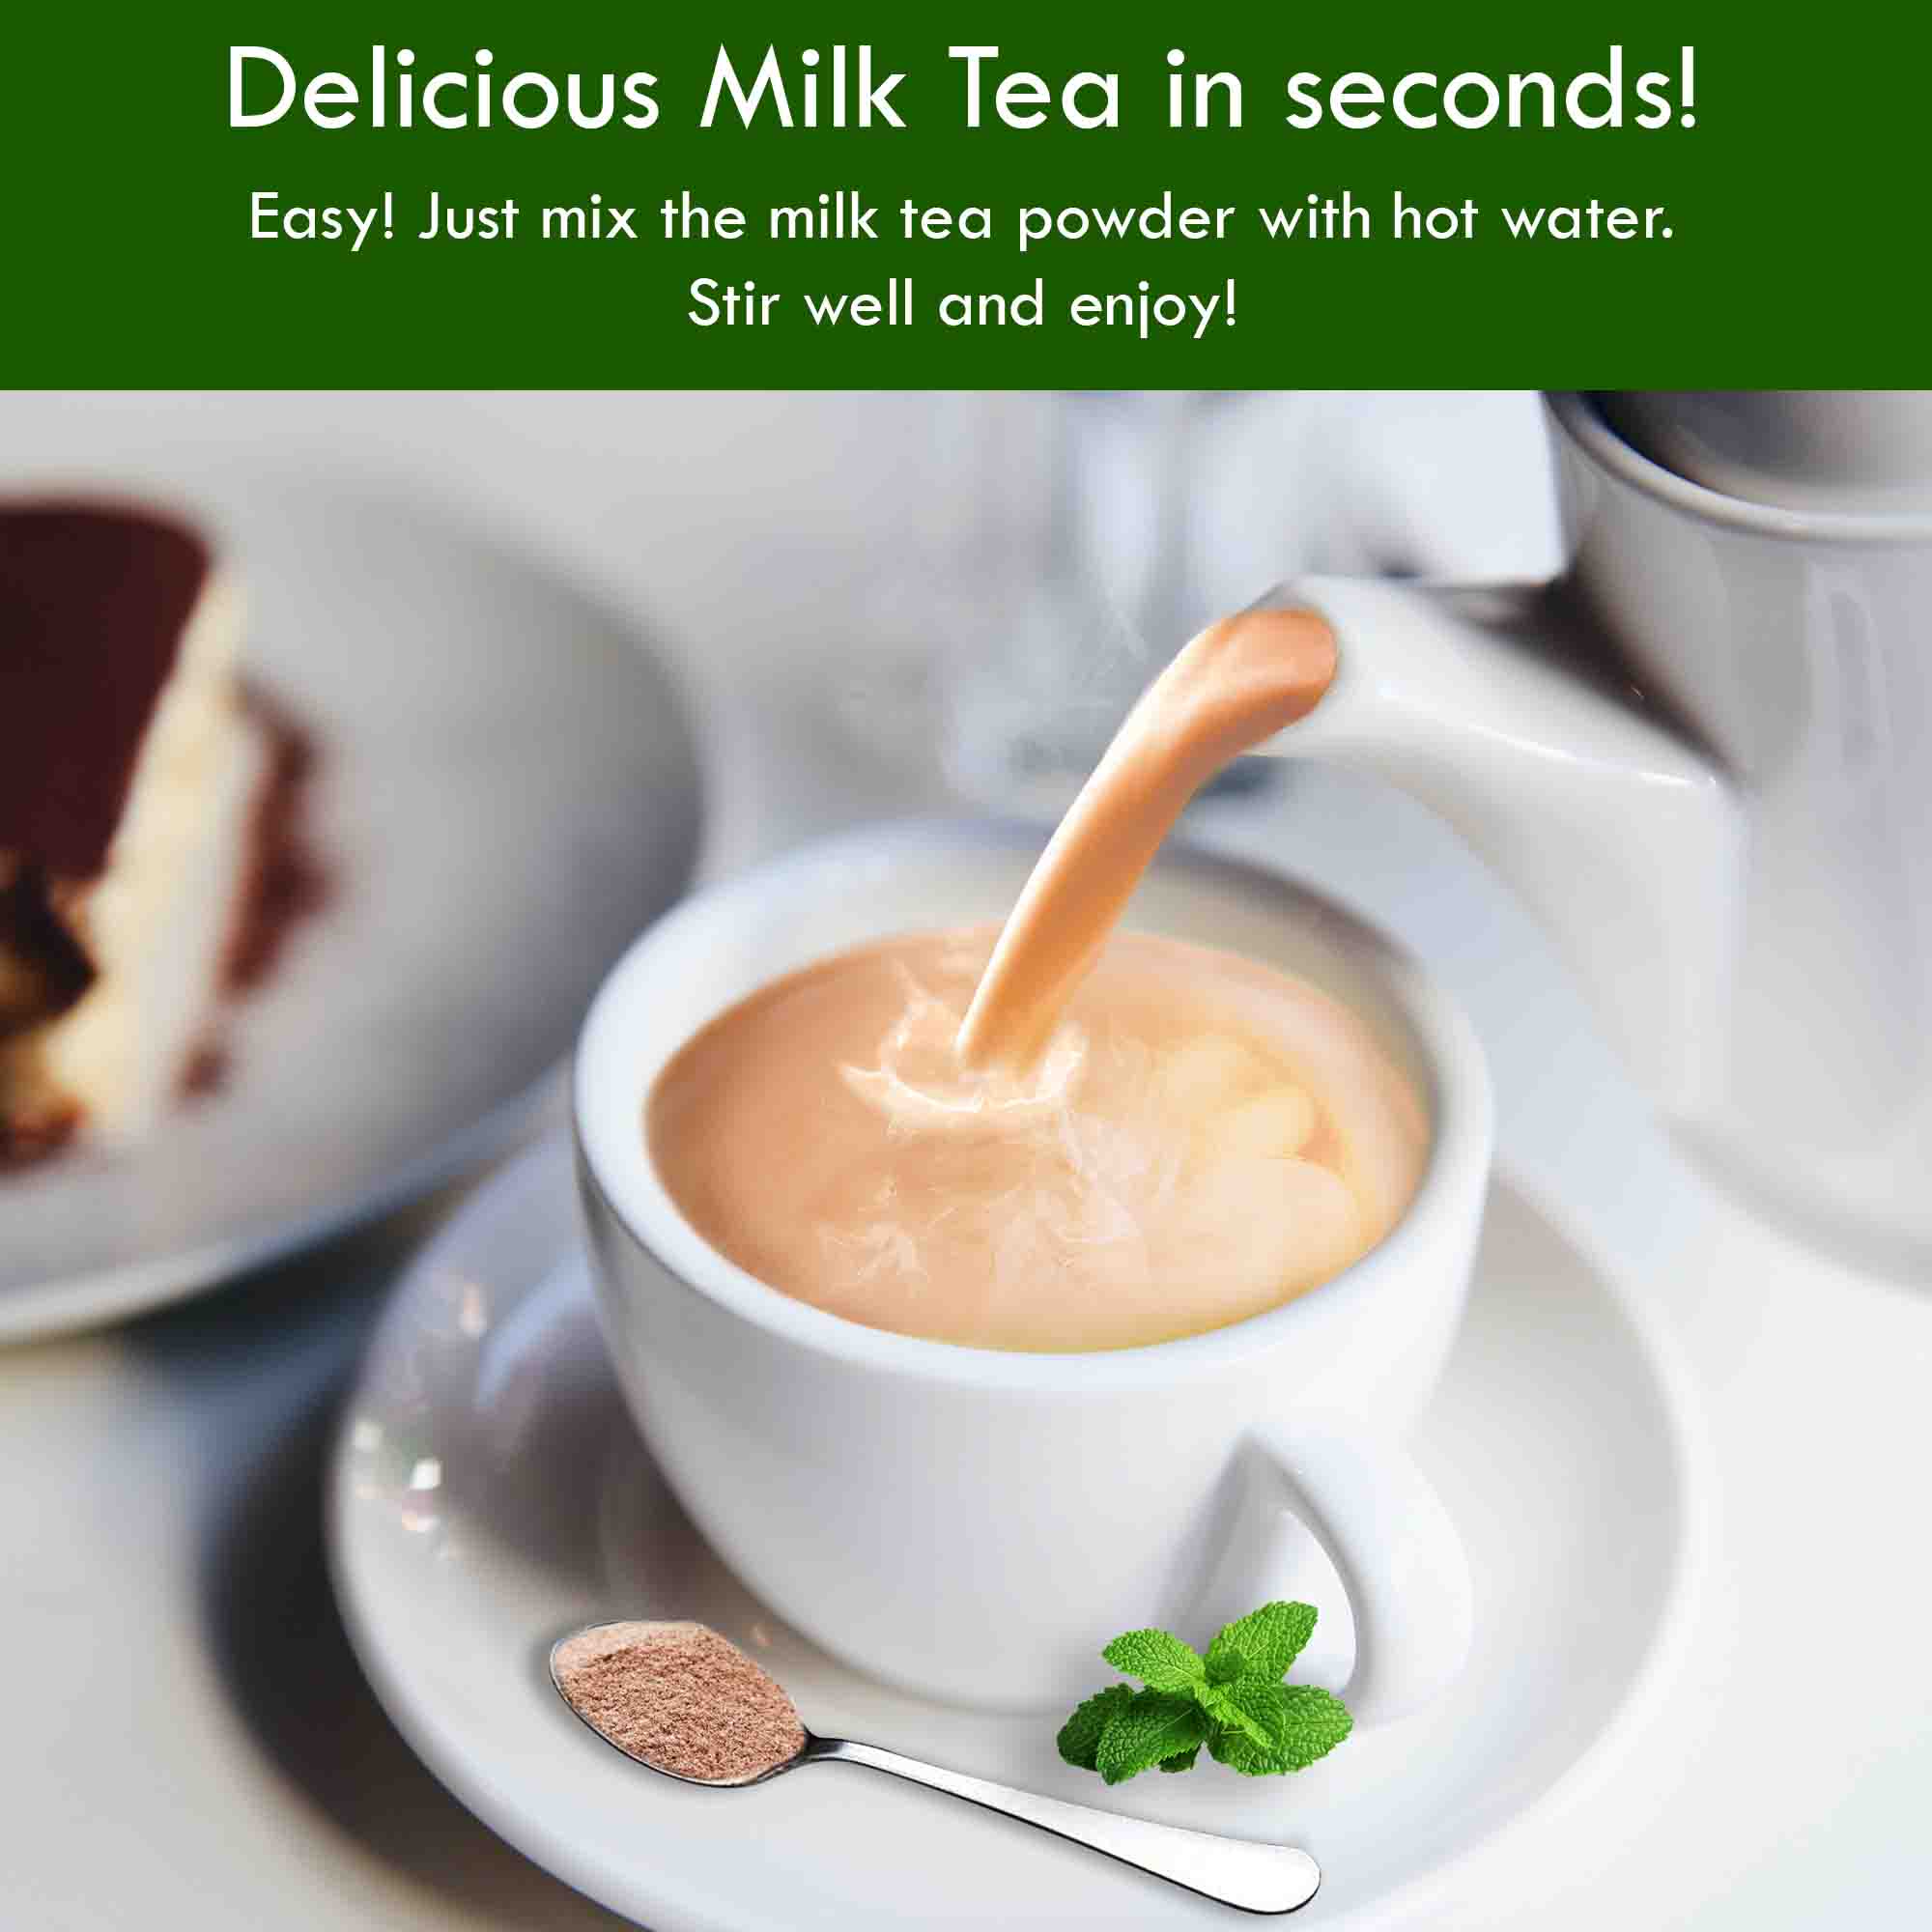 delicious milk tea can be made in seconds